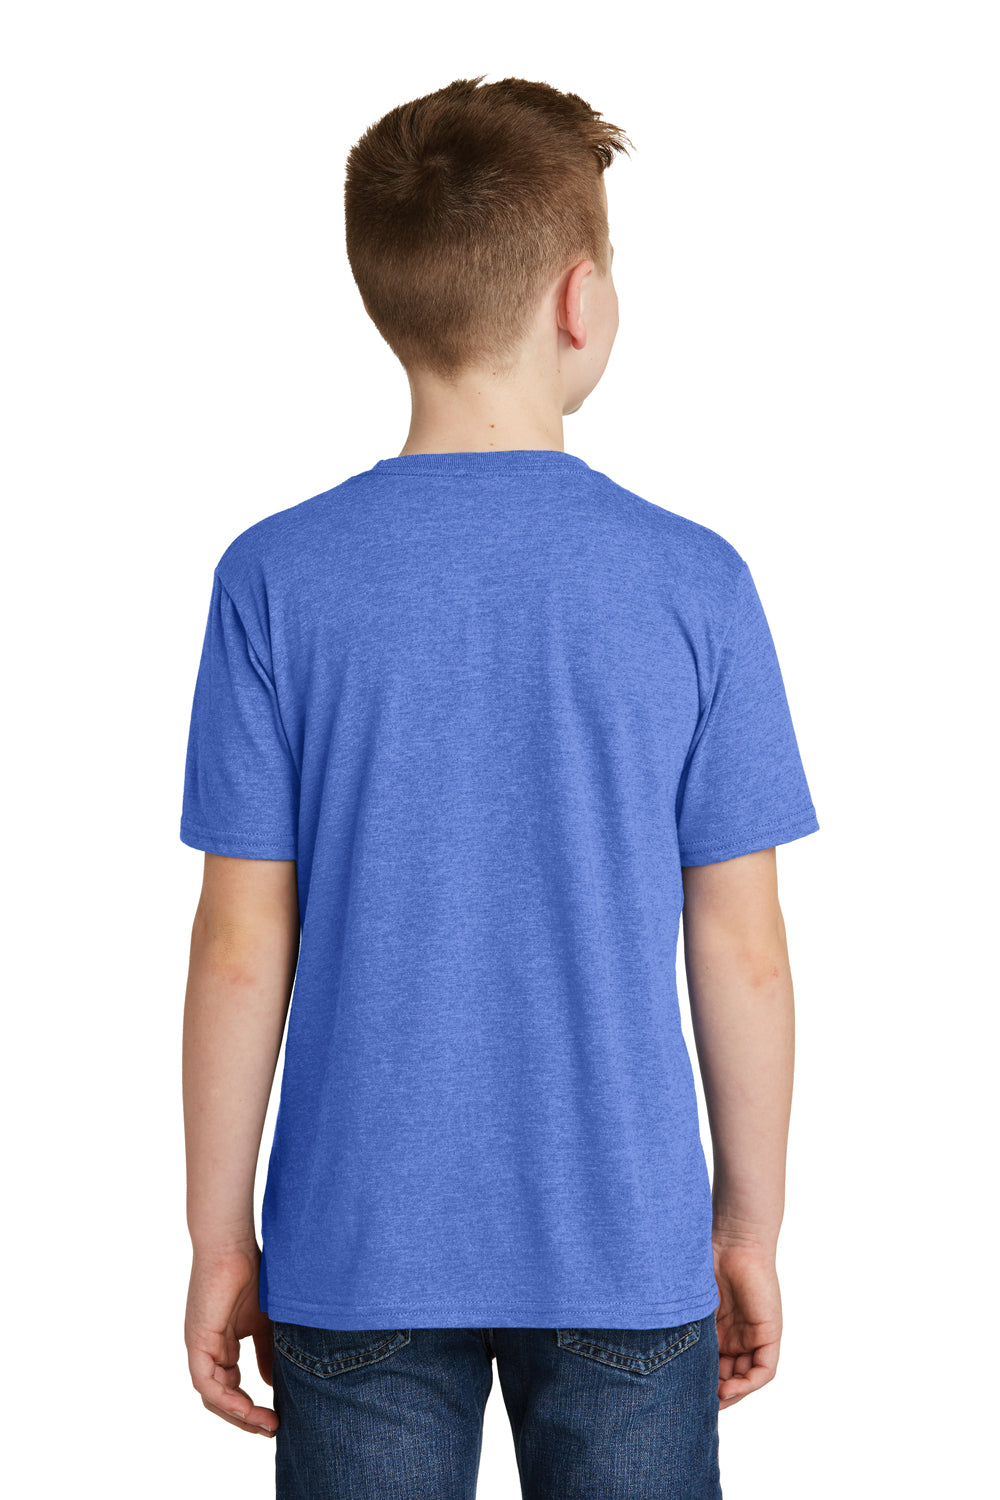 District DT6000Y Youth Very Important Short Sleeve Crewneck T-Shirt Royal Blue Frost Back